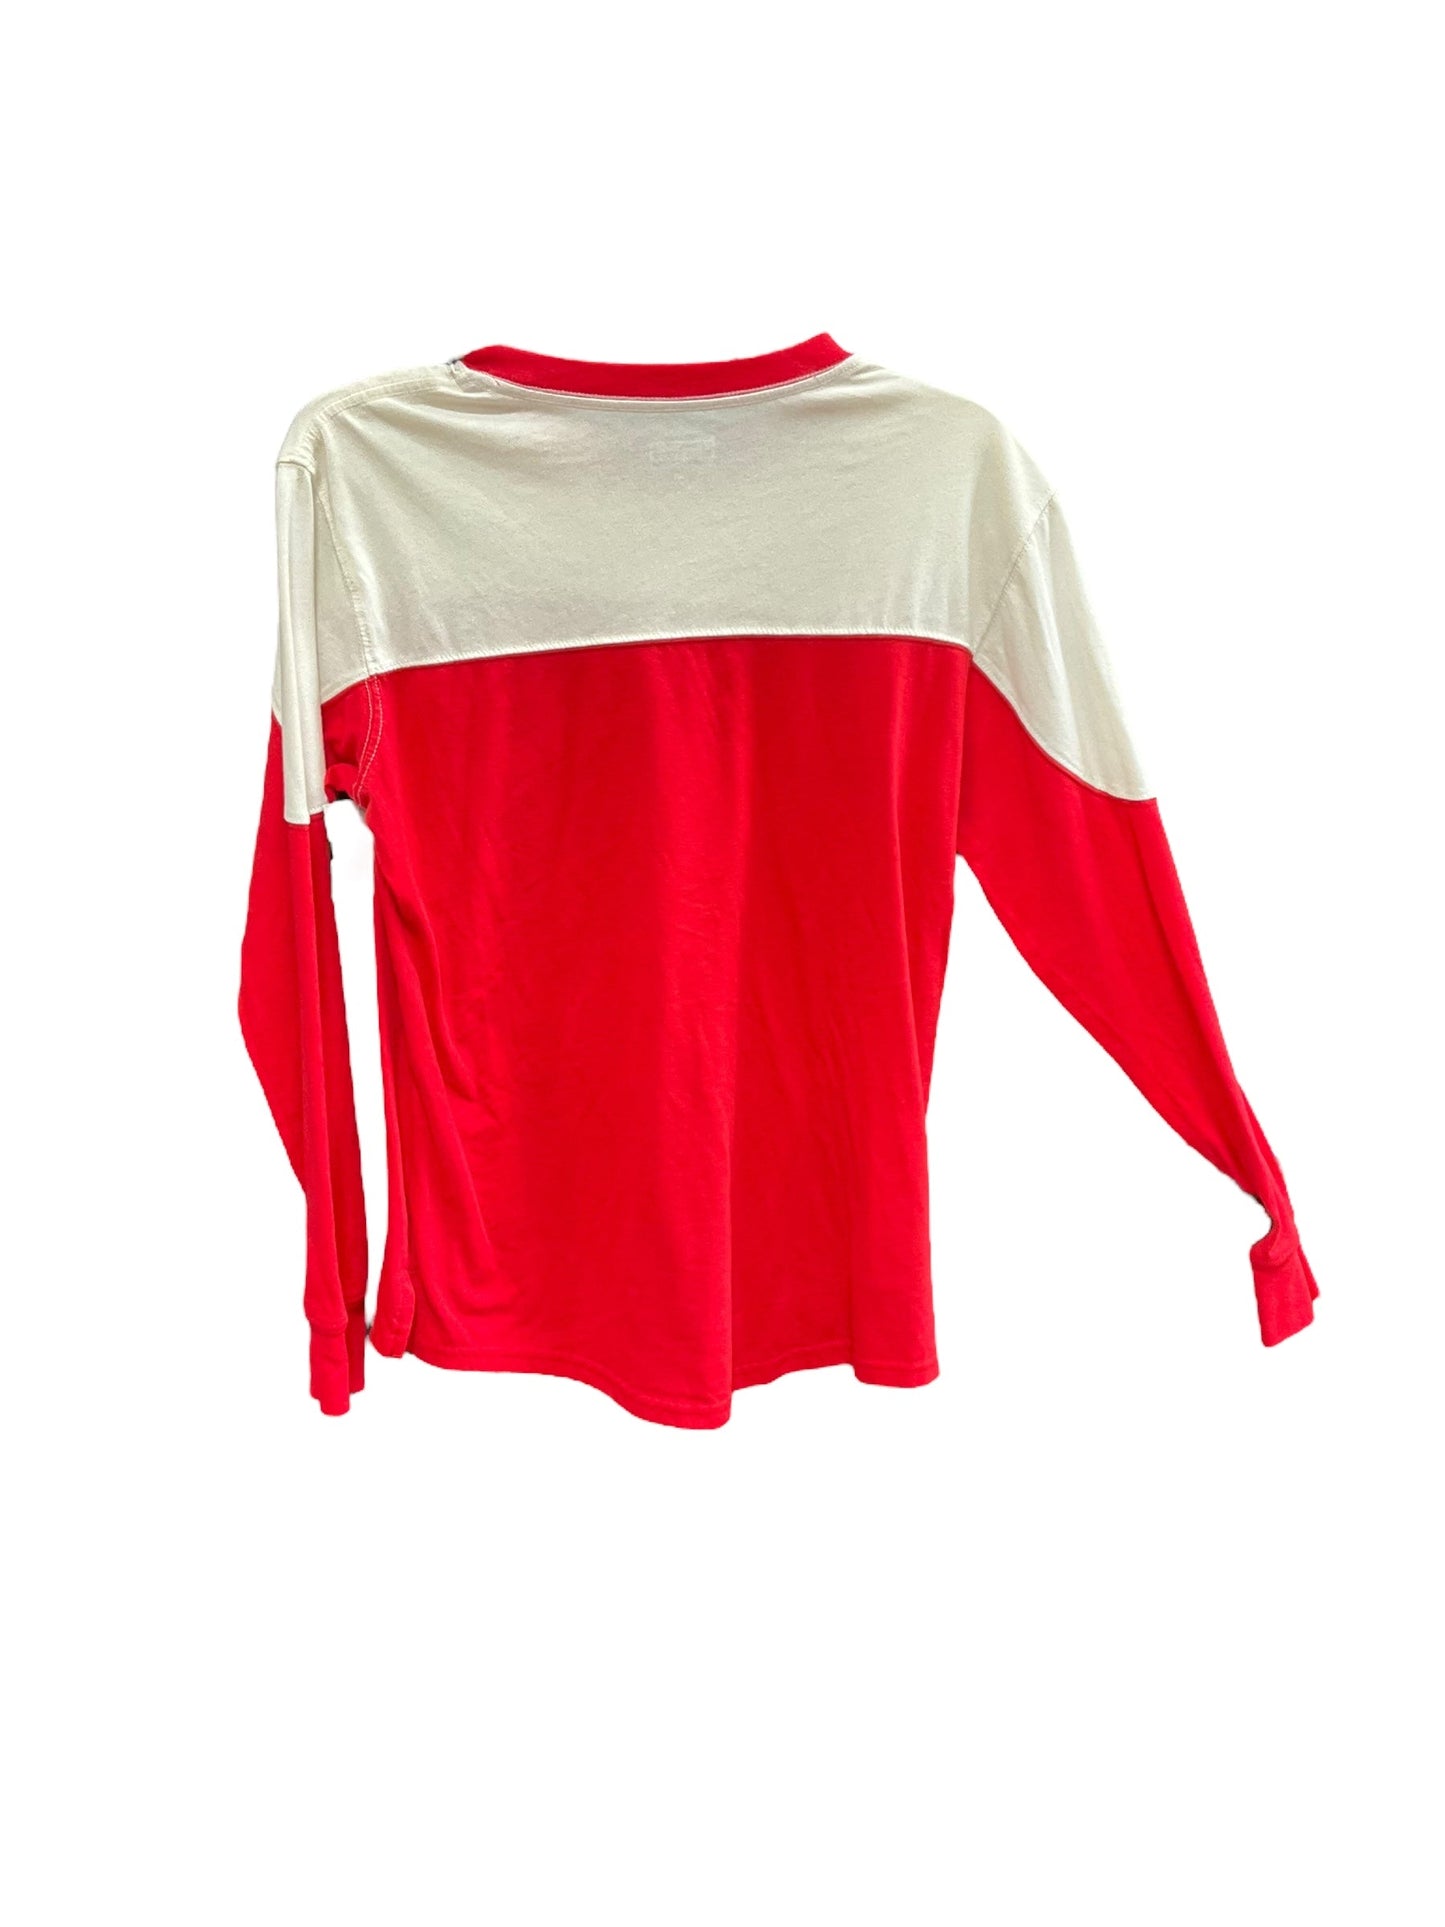 Red White Athletic Top Long Sleeve Collar Clothes Mentor, Size S